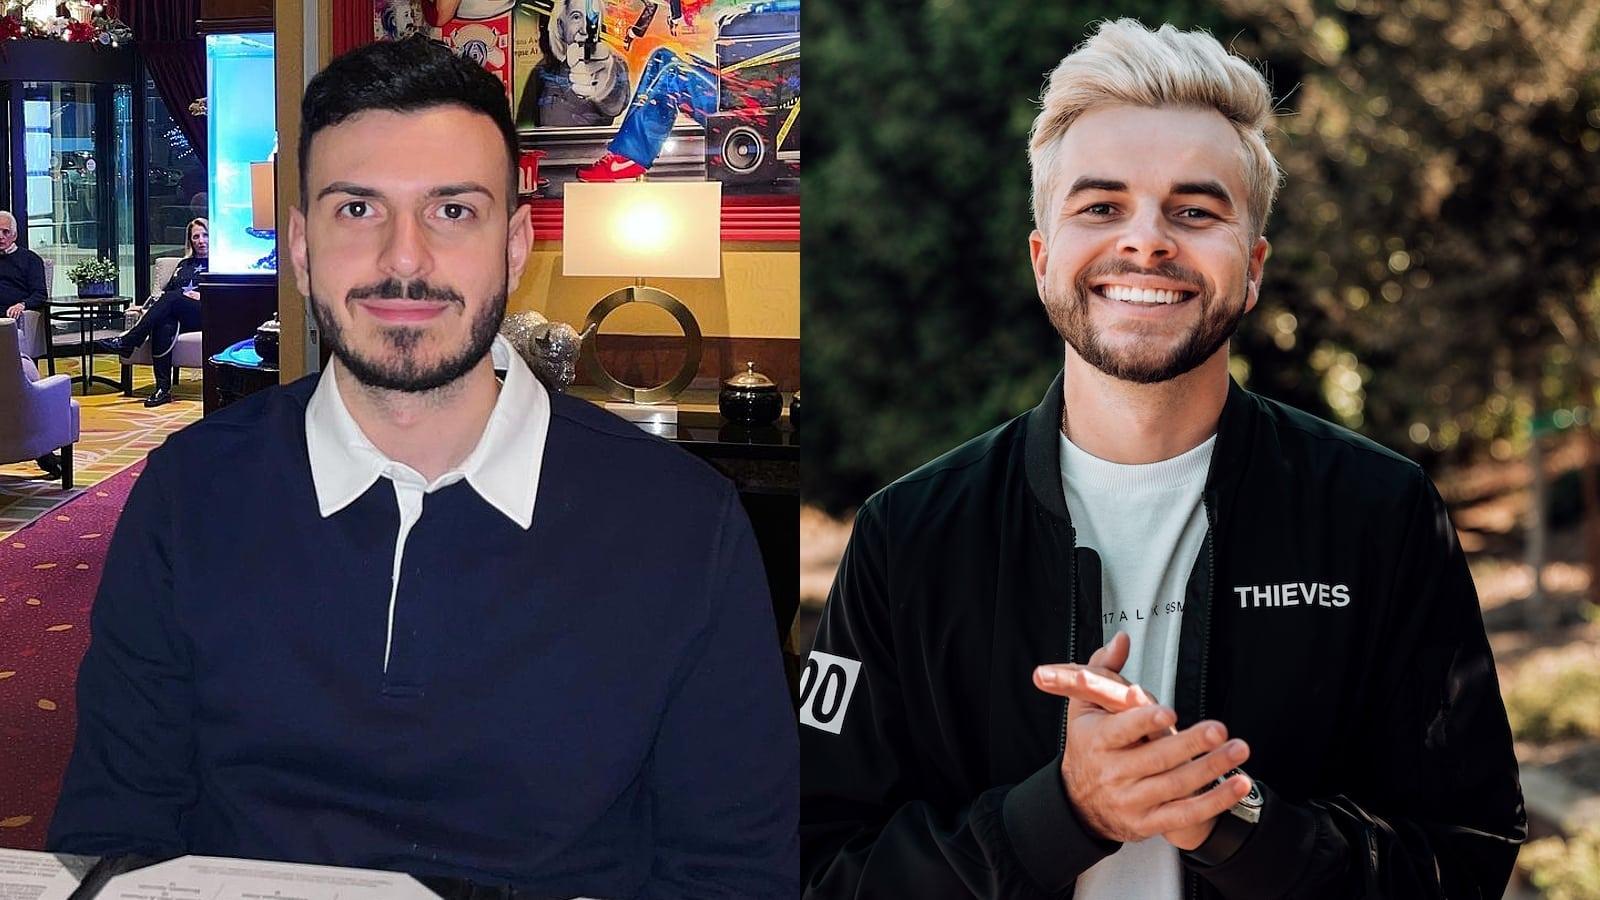 Tarik and Nadeshot side by side picture